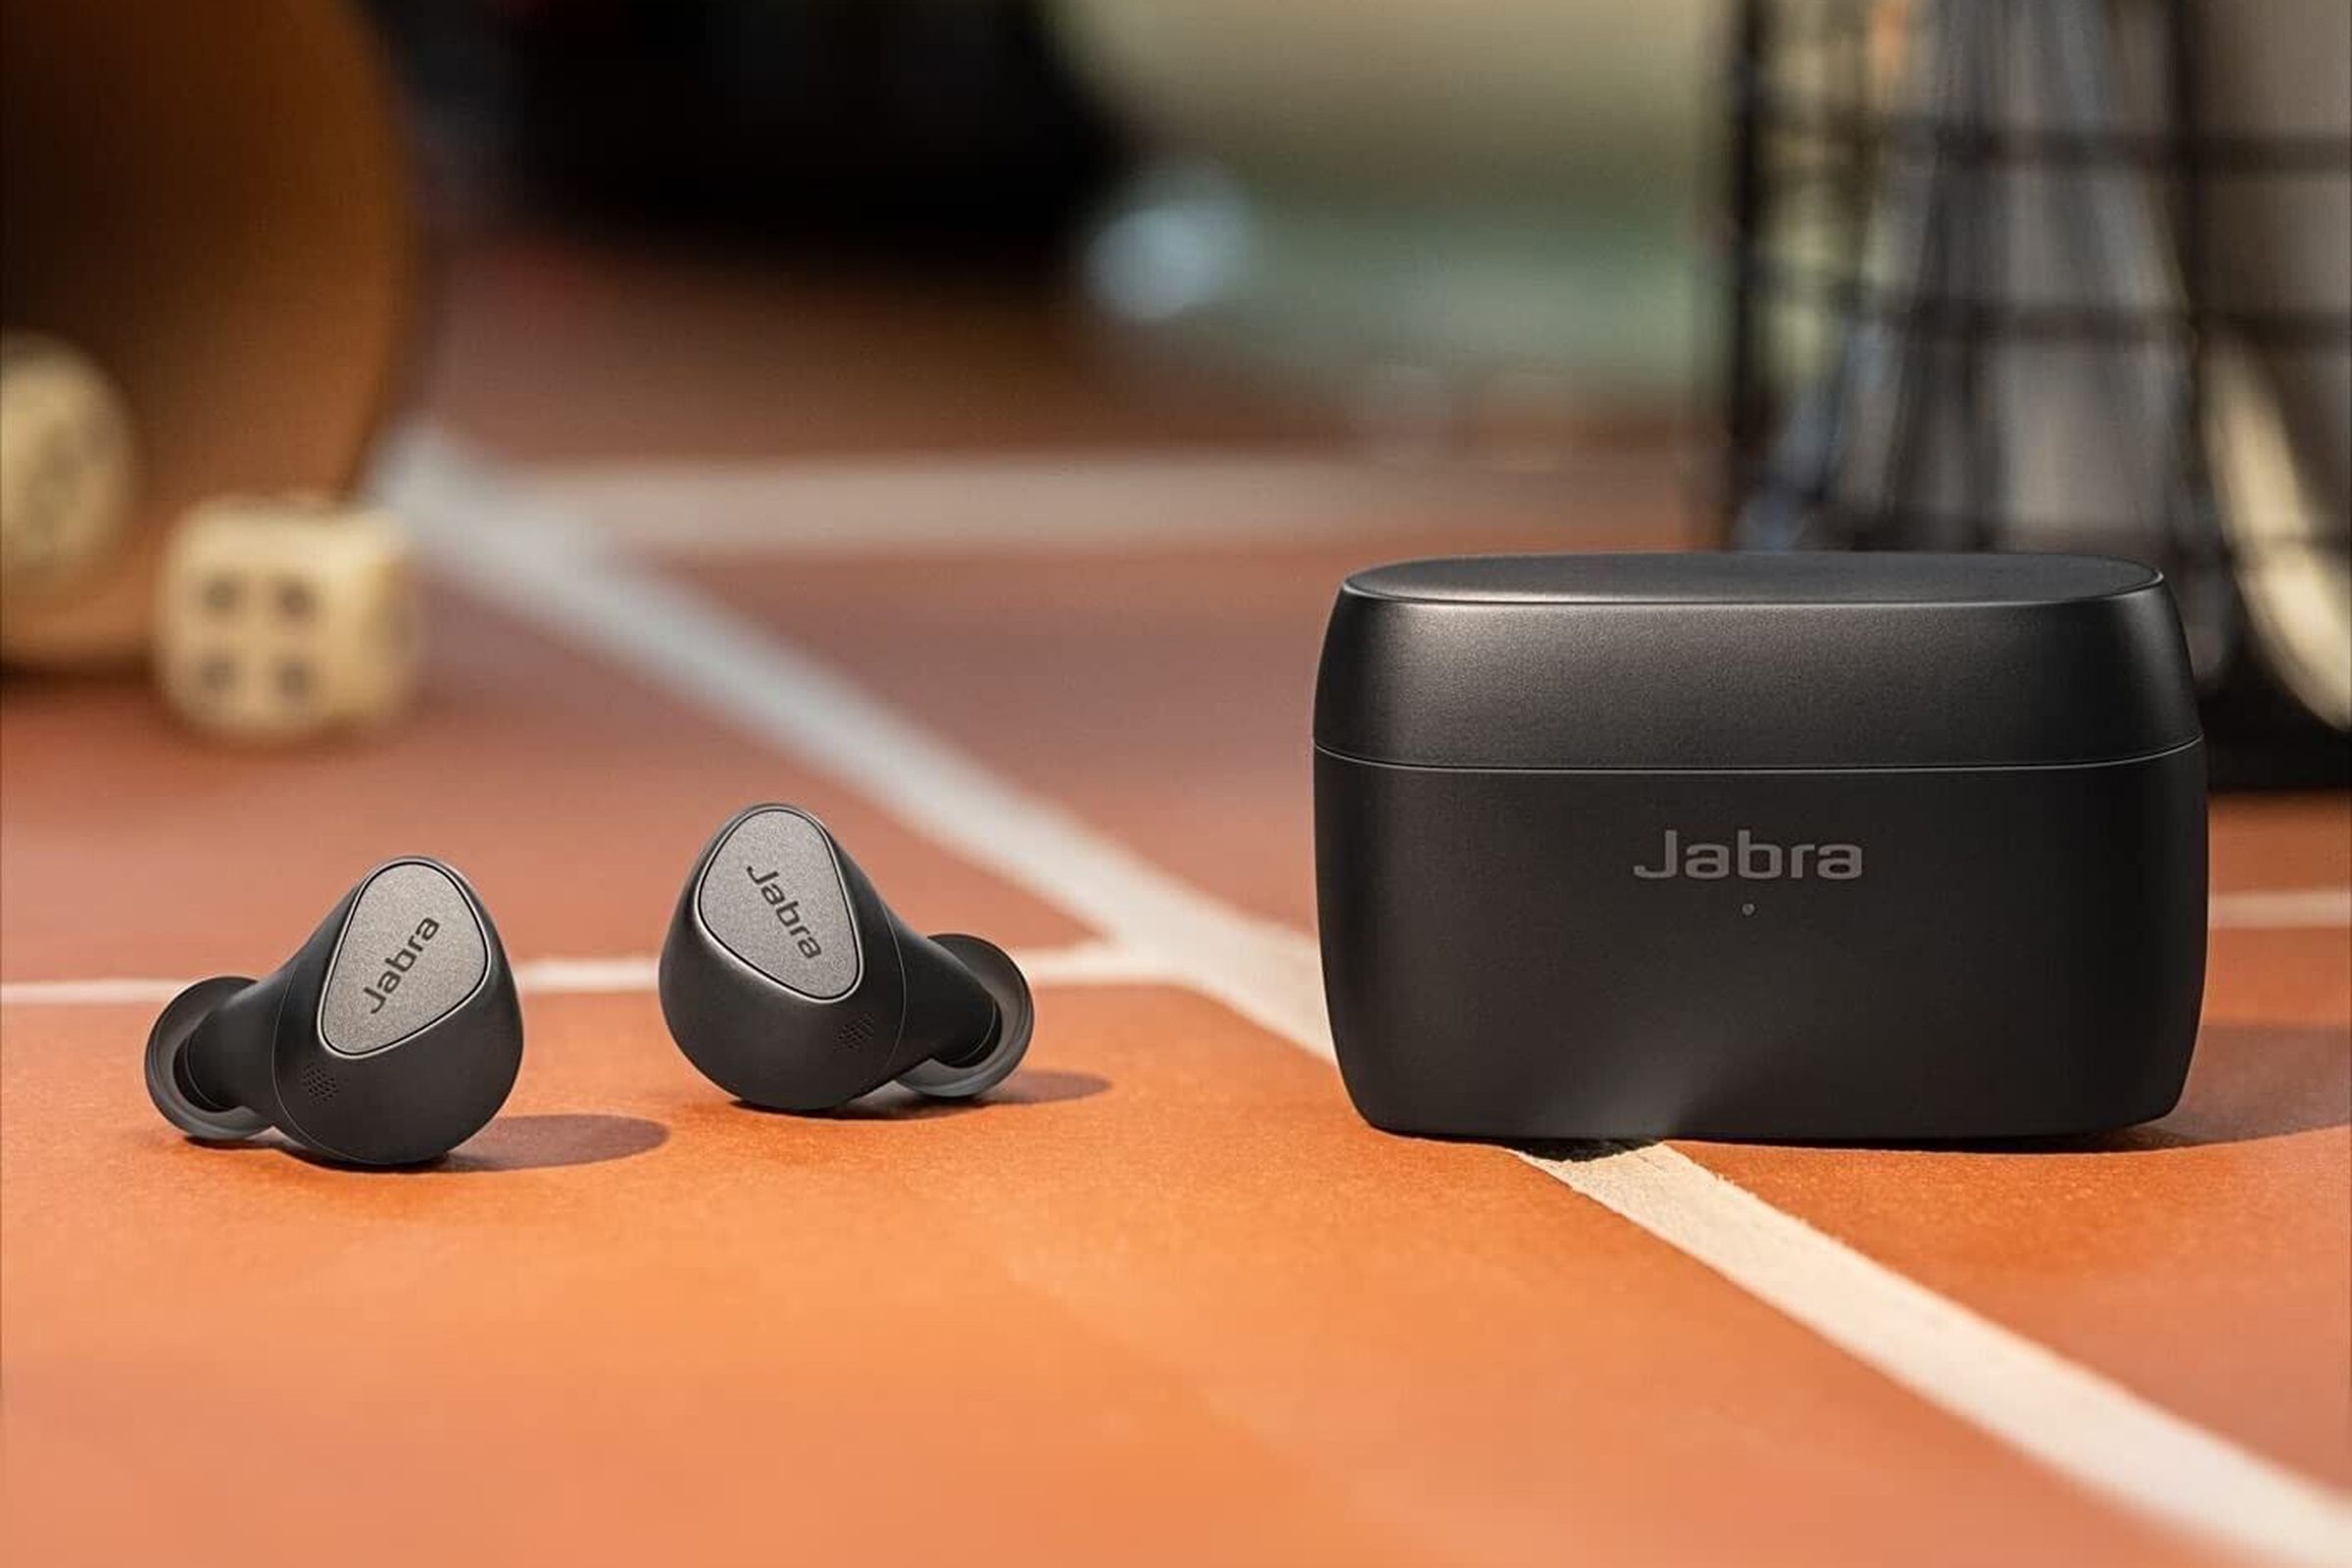 A black pair of the Jabra Elite 5 earbuds sitting beside their case on a red, tiled floor.